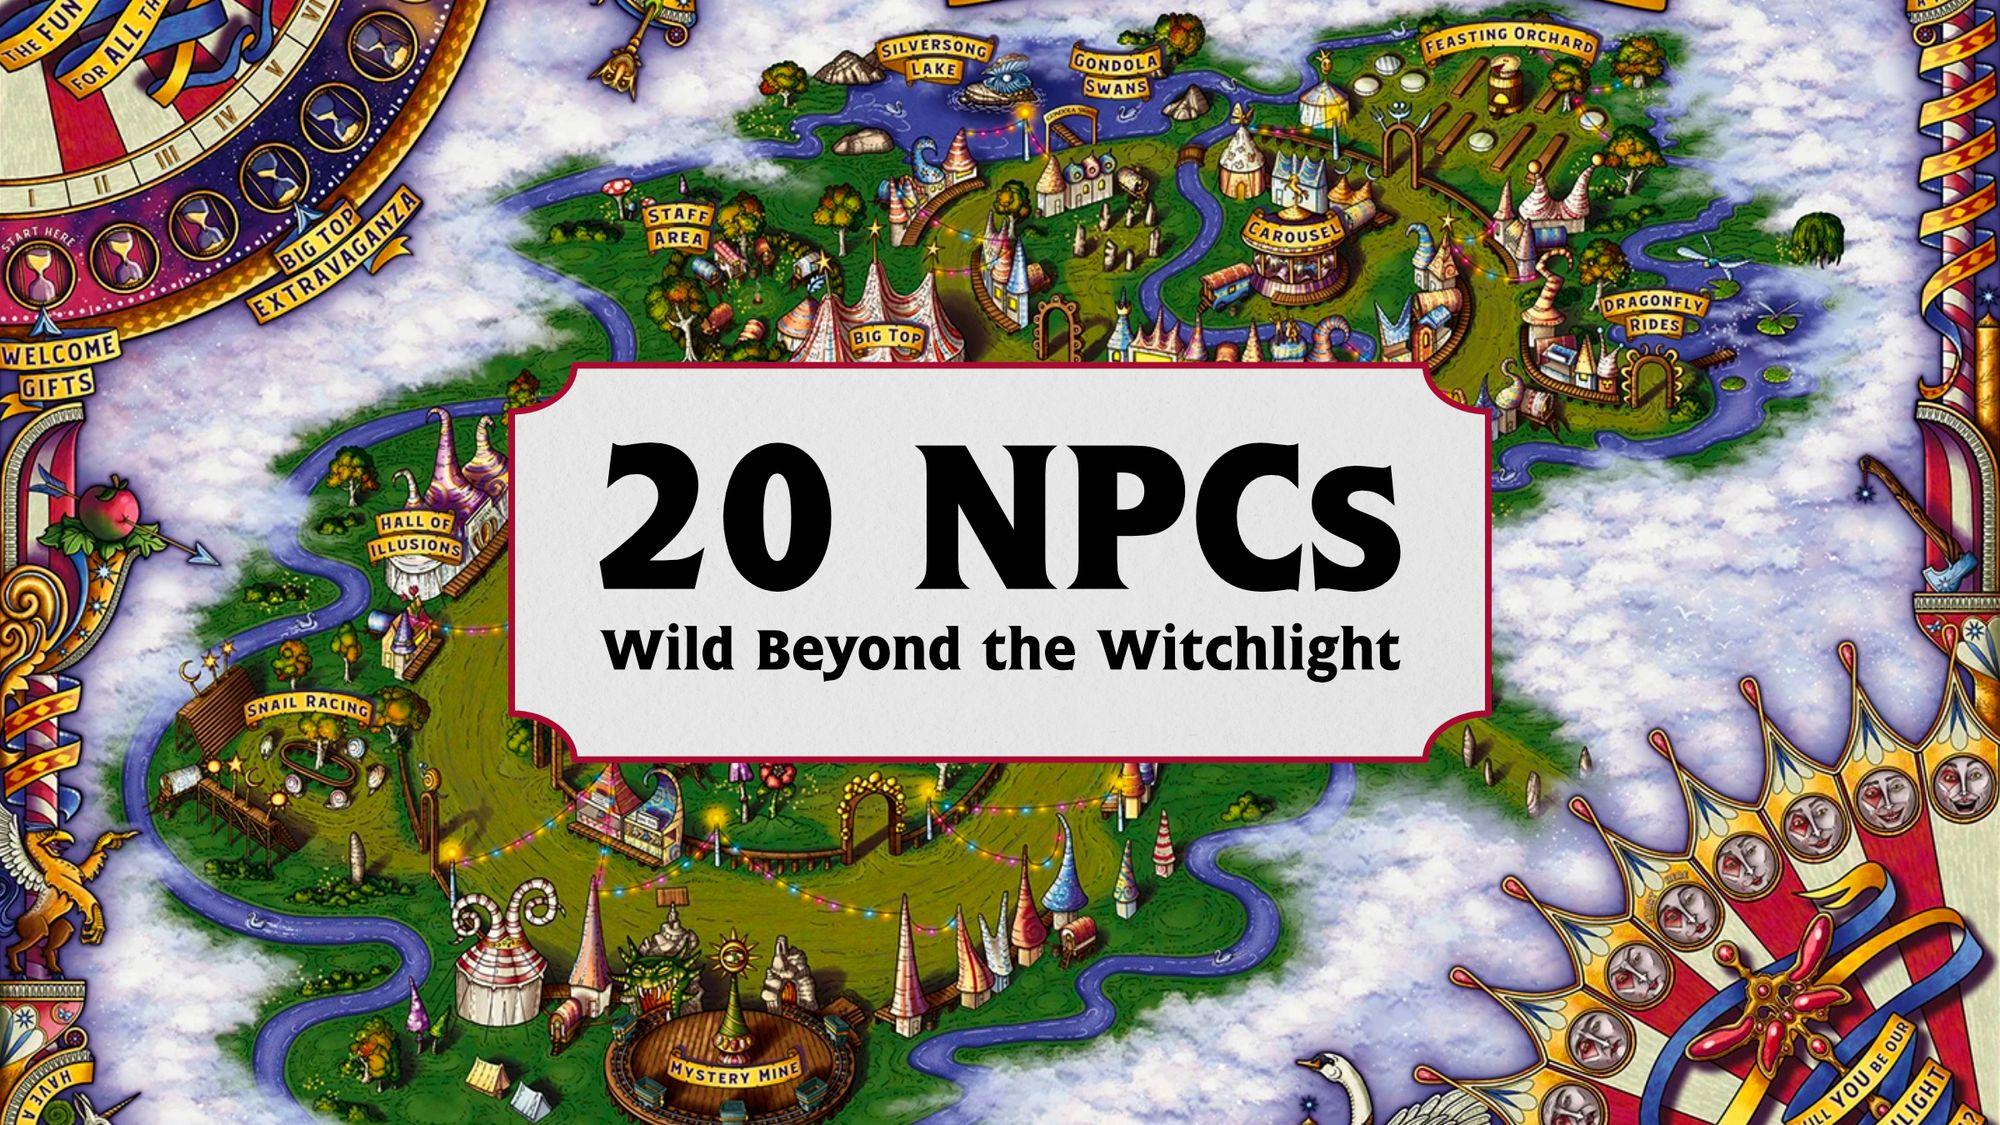 Wild Beyond the Witchlight Map by Stacey Allen & Will Doyle. Copyright Wizards of the Coast.